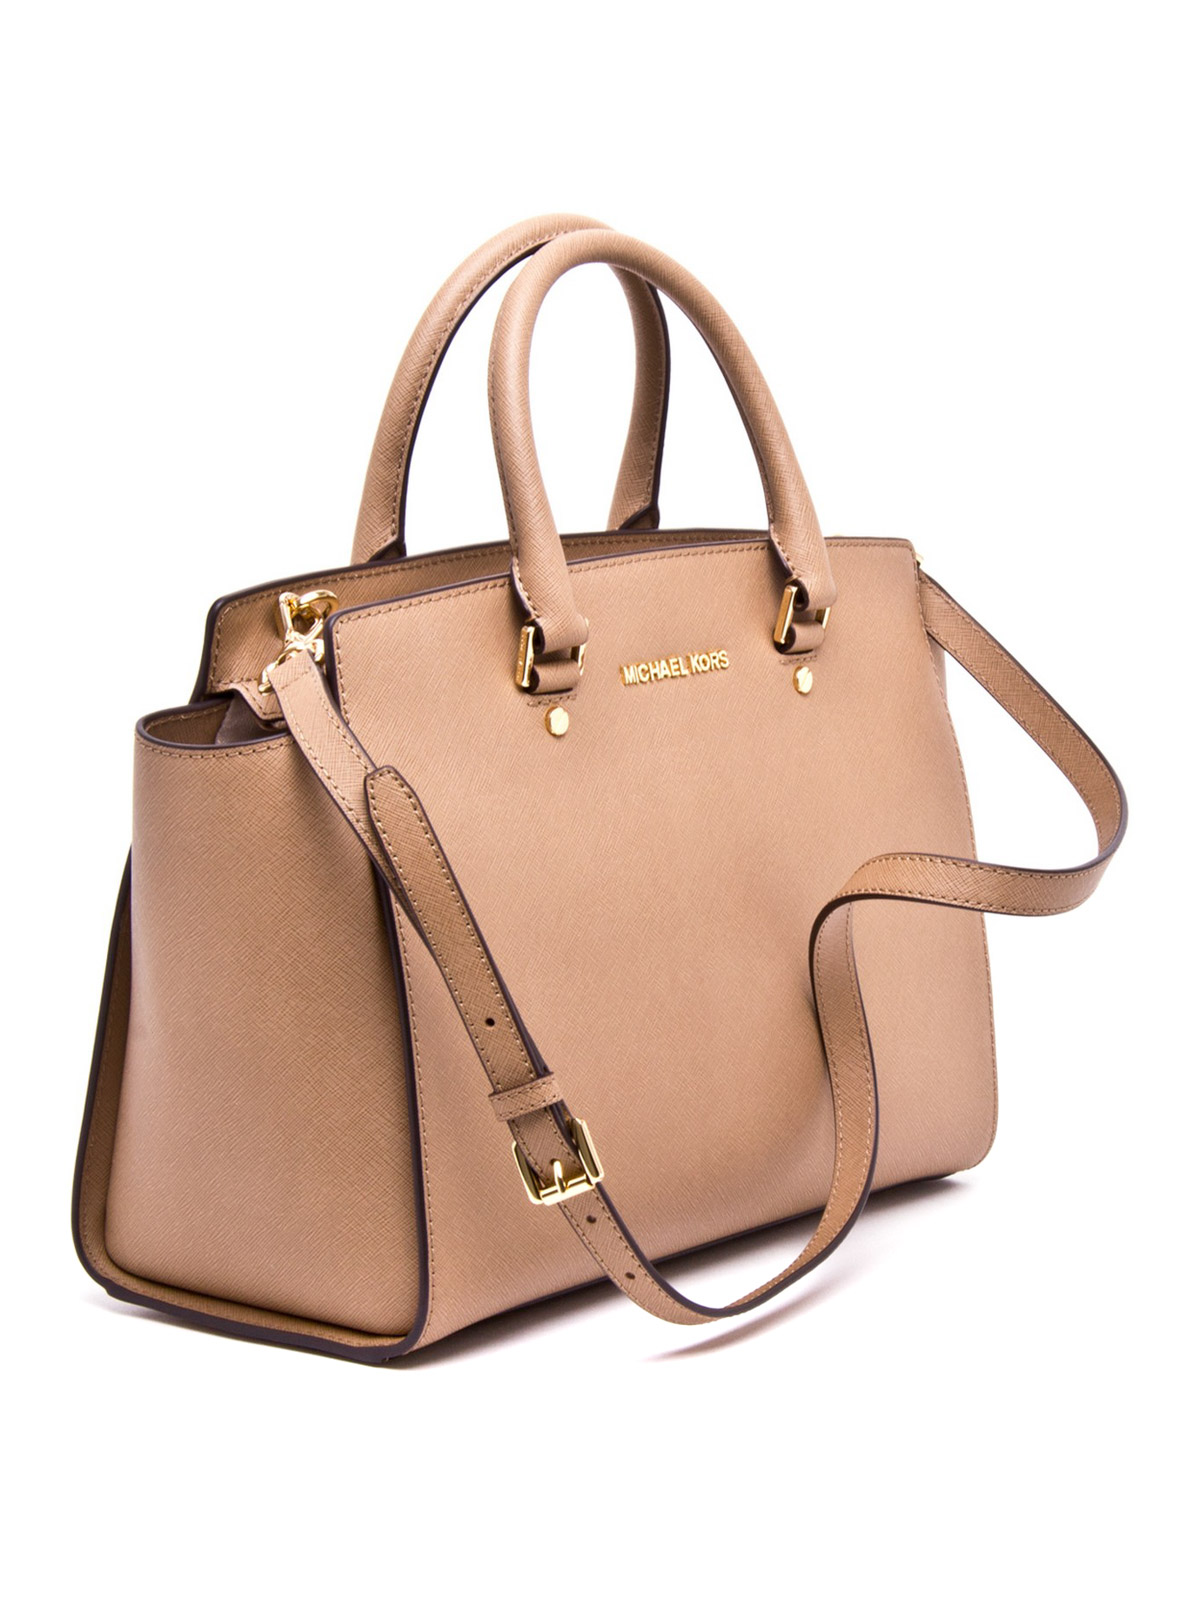 Totes bags Michael Kors - Selma large leather tote - 30S3GLMS7L185